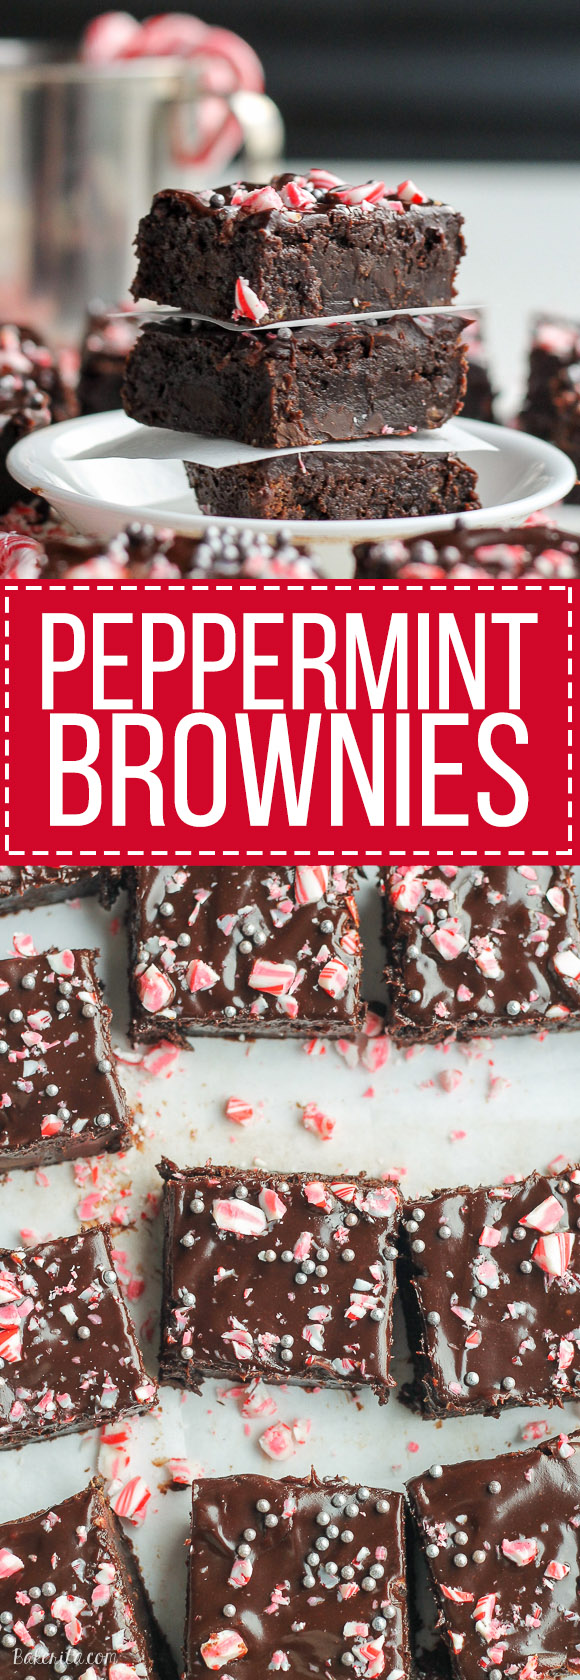 These Peppermint Brownies are classic fudge brownies with peppermint extract and mint chips for a chilly winter twist. This easy brownie recipe is topped with dark chocolate ganache and crushed candy canes.